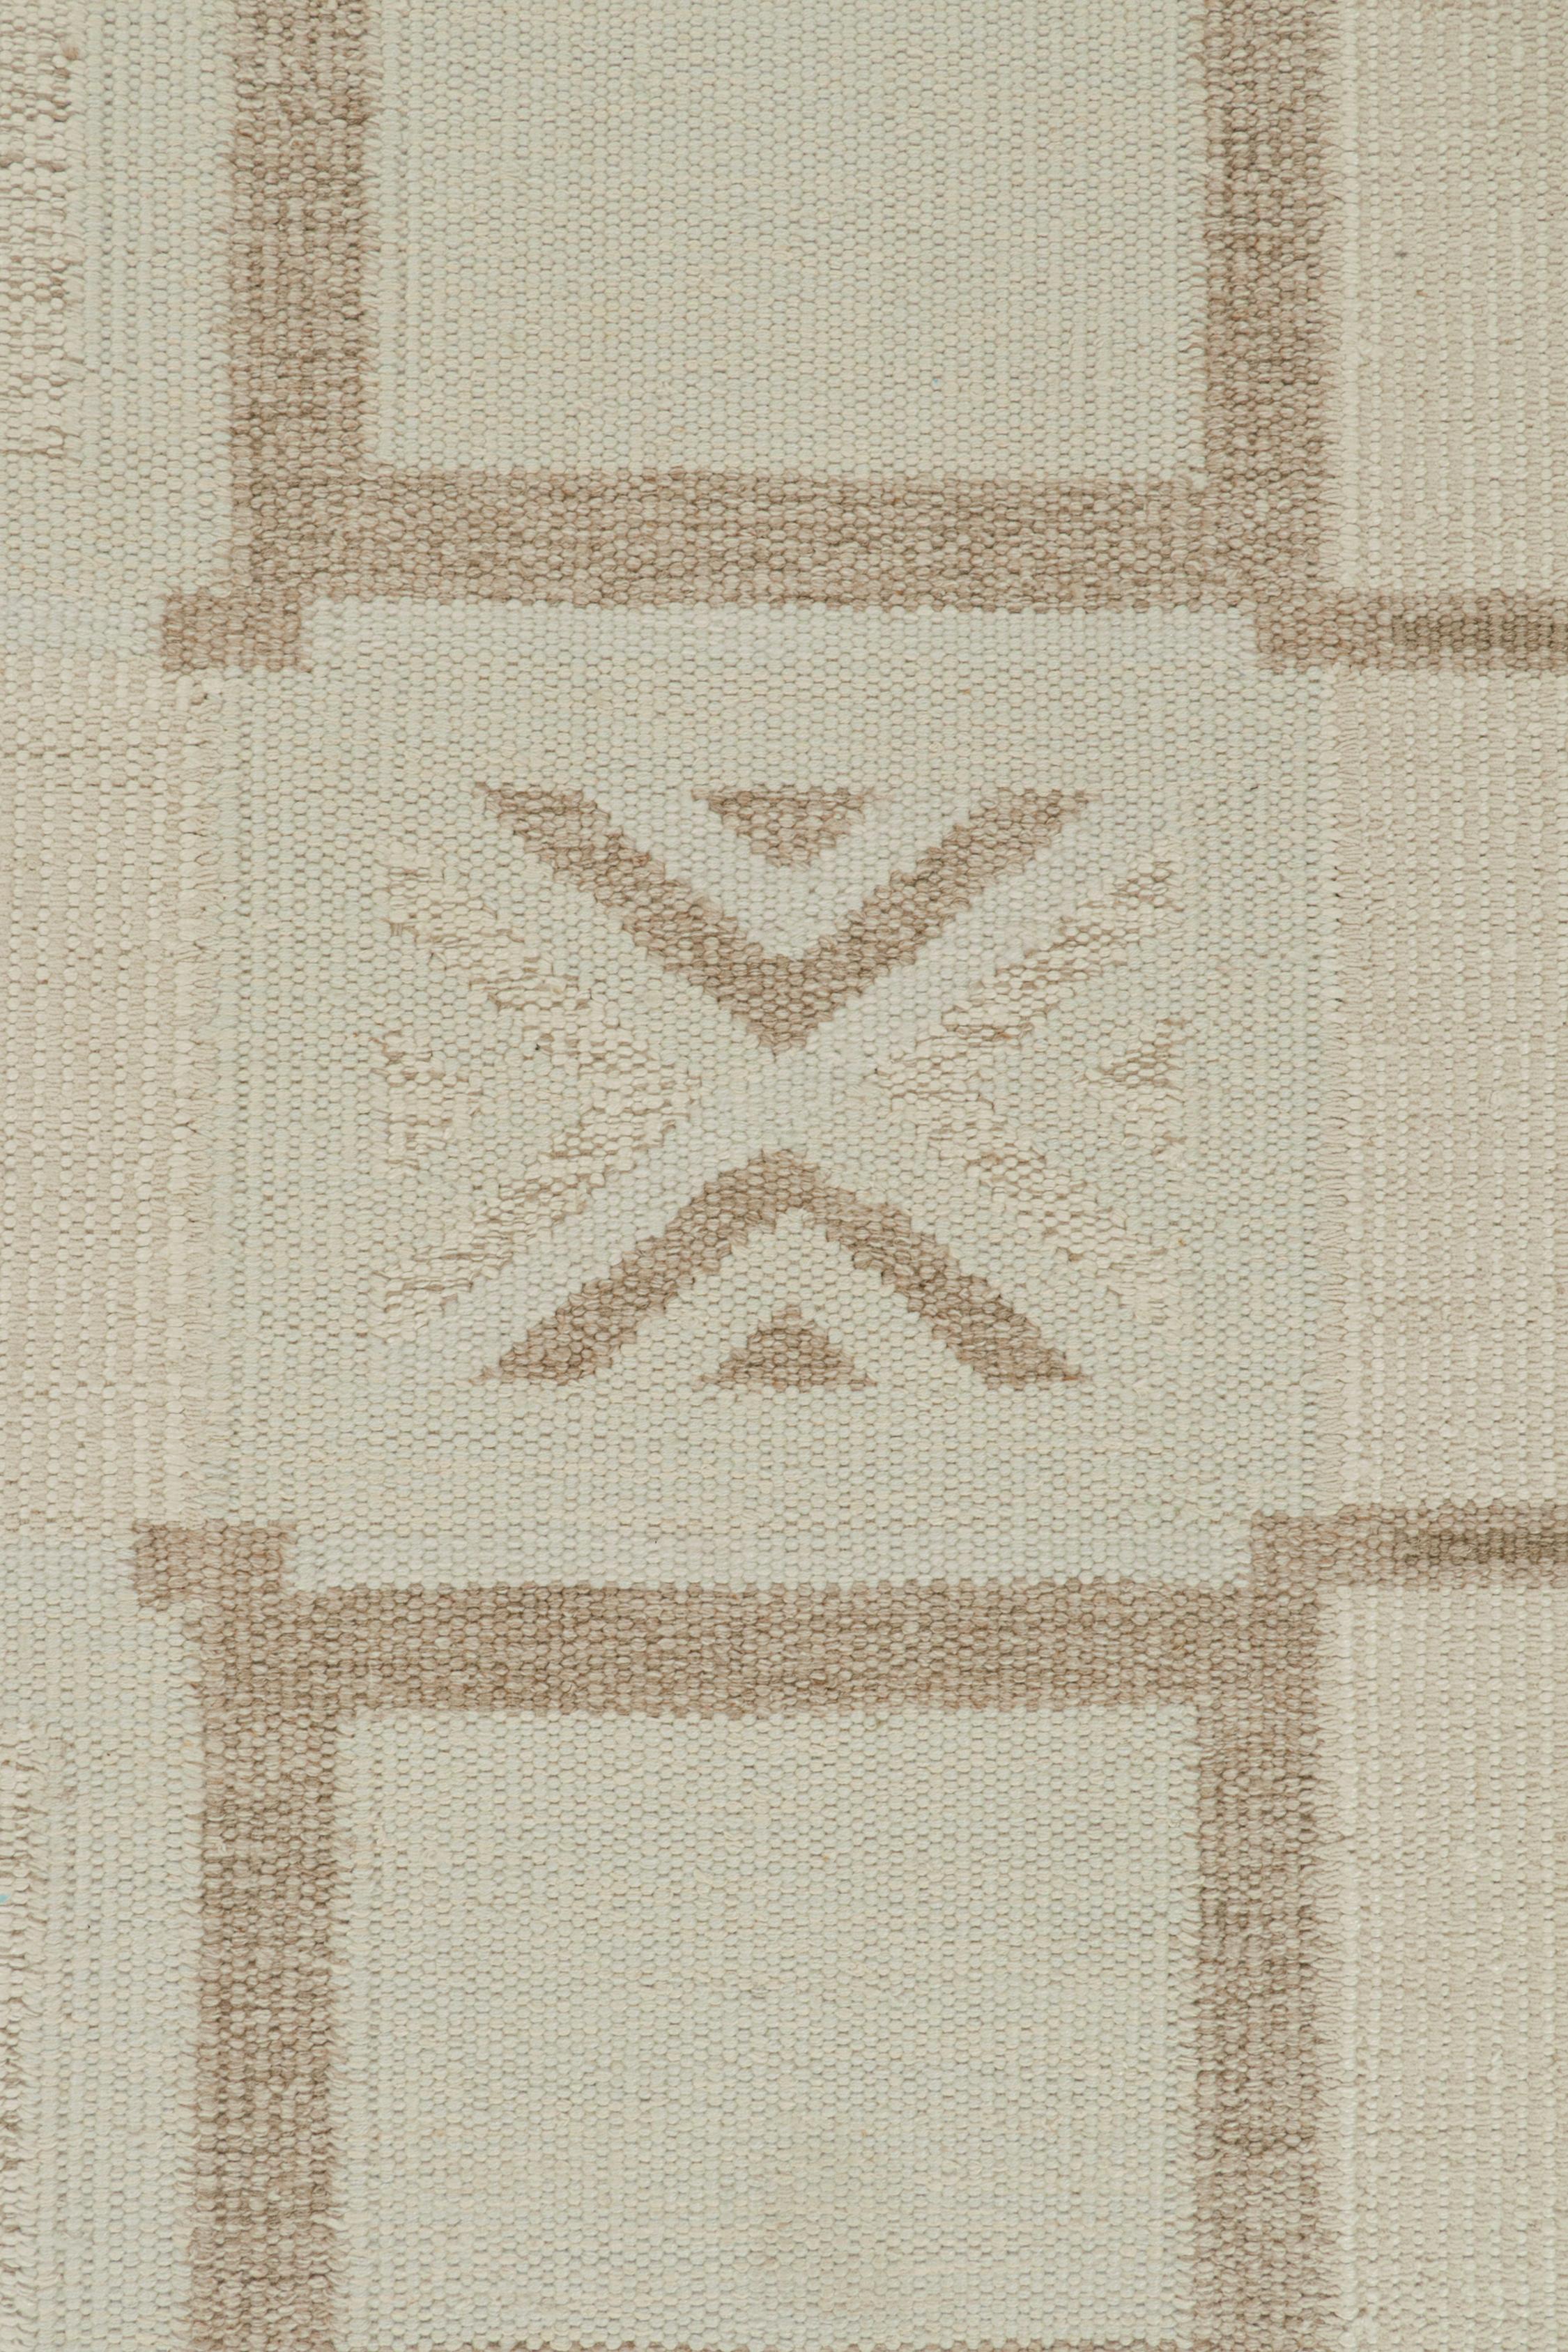 Rug & Kilim’s Scandinavian style Kilim in White & Beige-Brown Geometric Patterns In New Condition For Sale In Long Island City, NY